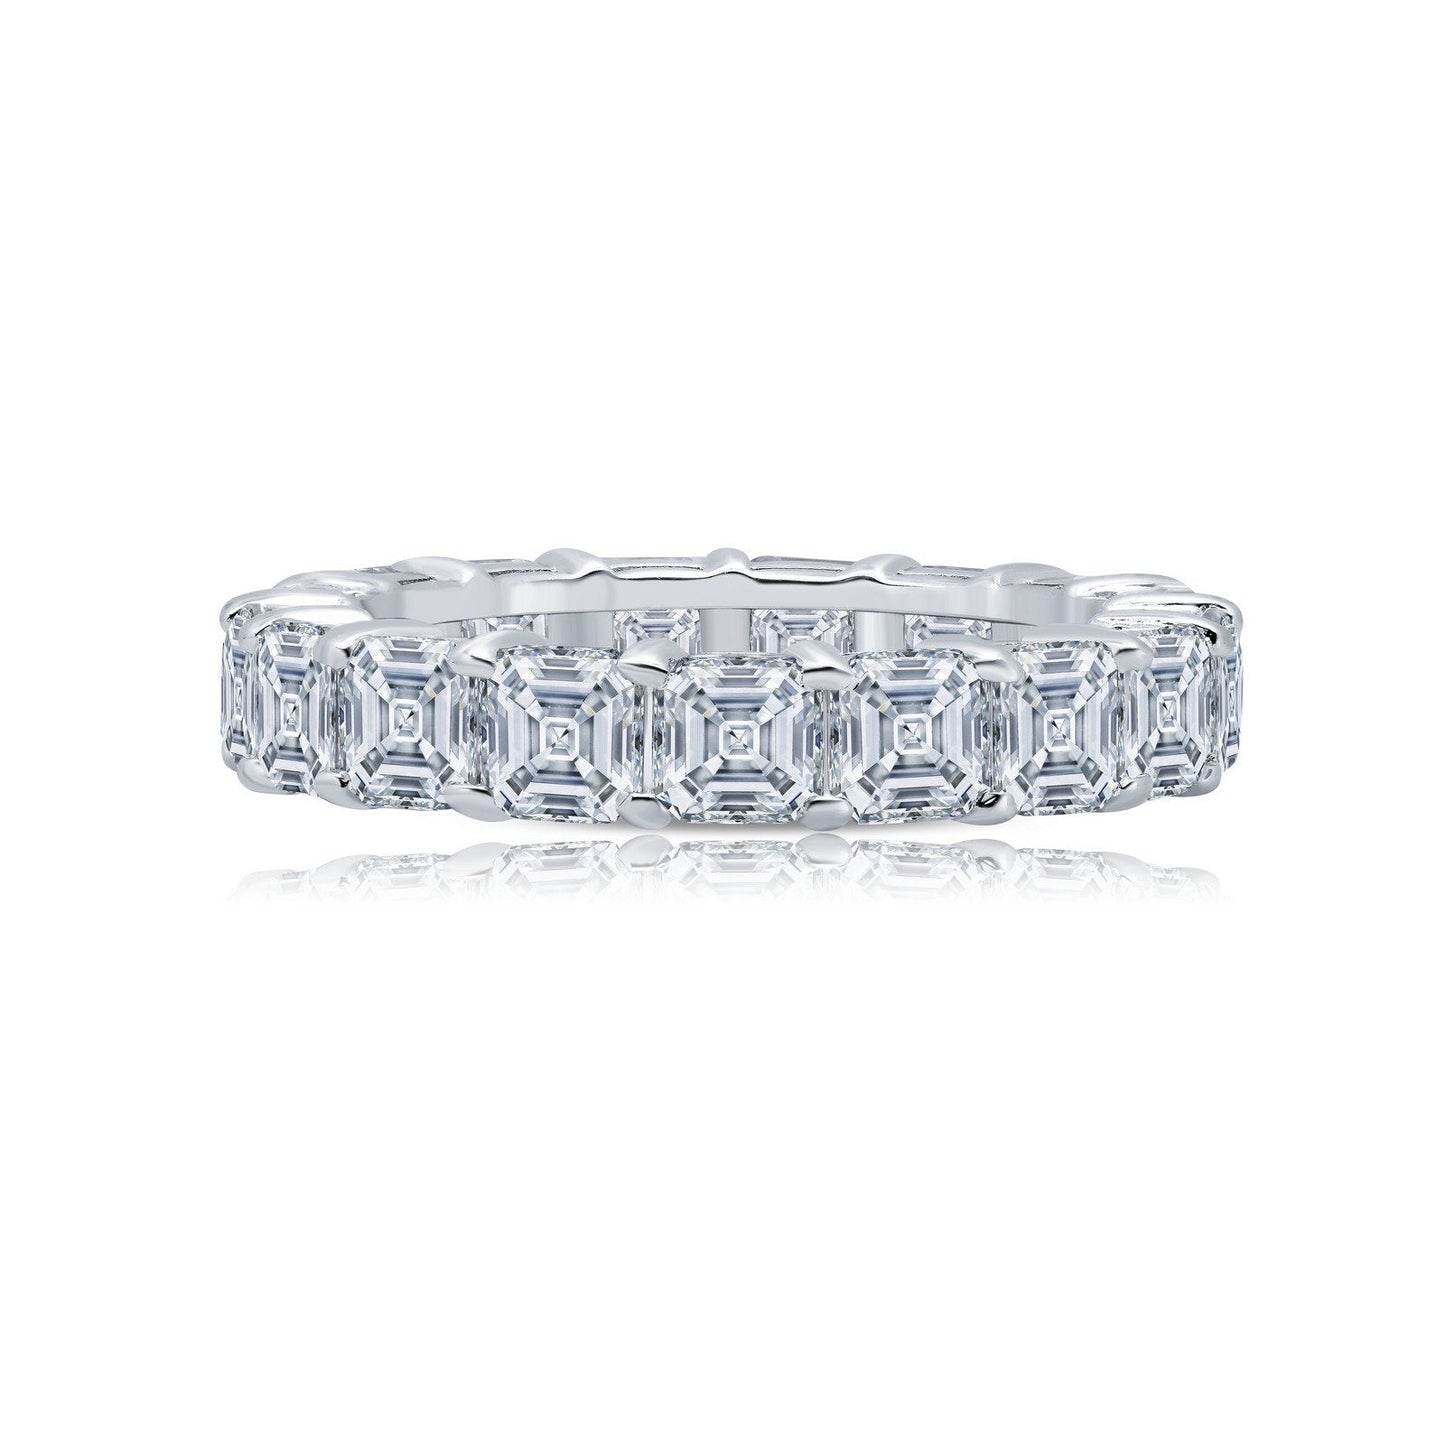 Load image into Gallery viewer, Lafonn 6.63 CTW Anniversary Eternity Band Simulated Diamond RINGS Size 6 Platinum 6.63 CTS Approx. 4mm (W)
